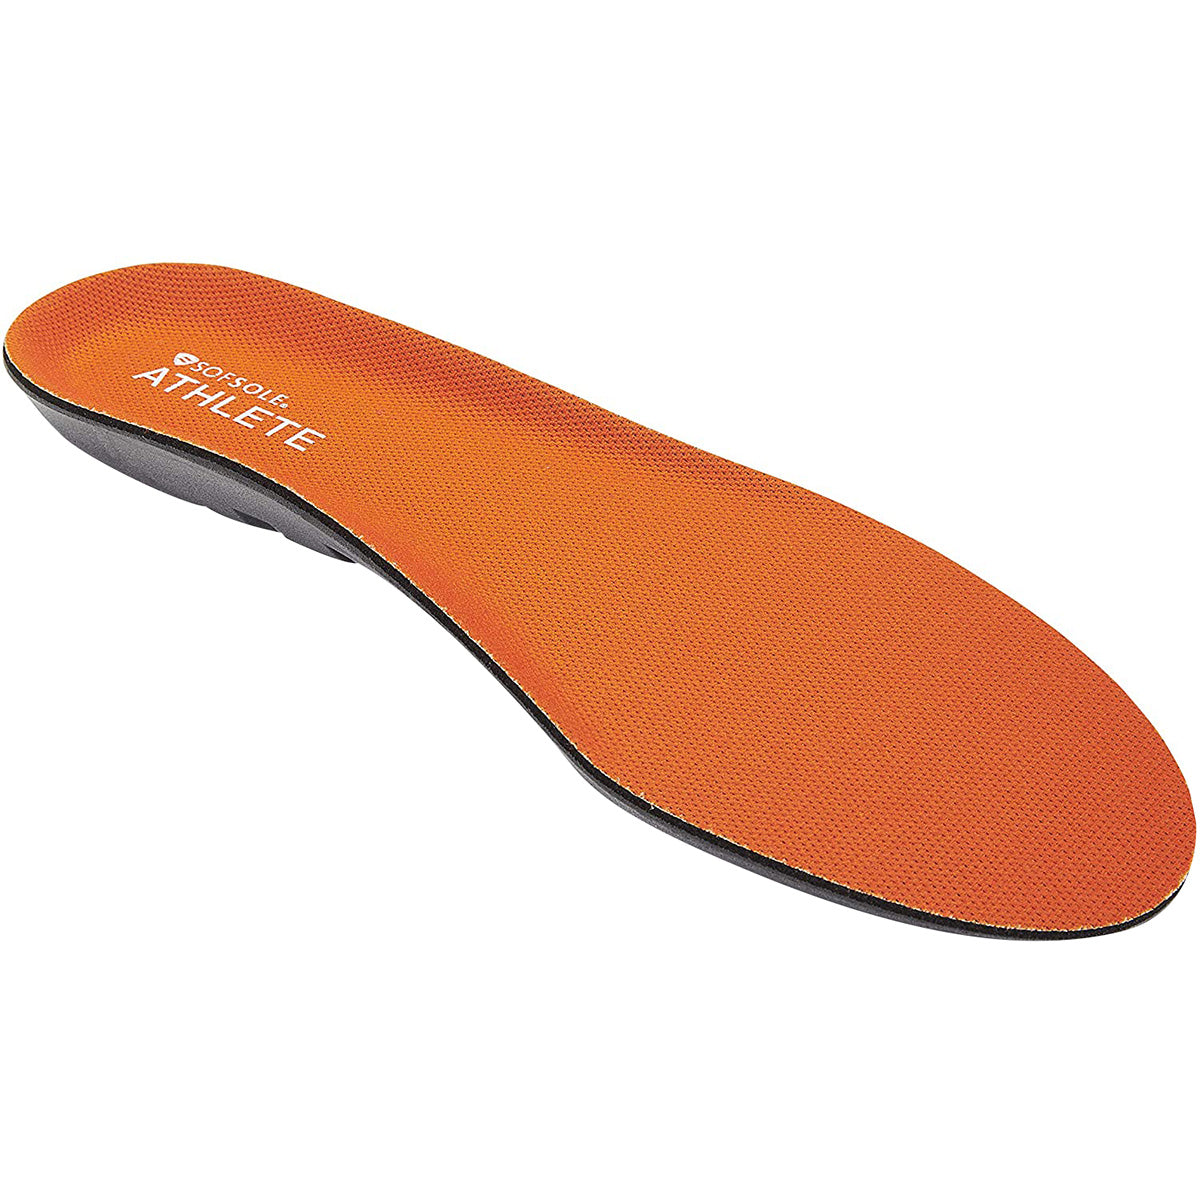 Sof Sole Athlete Full Length Shoe Insoles SofSole